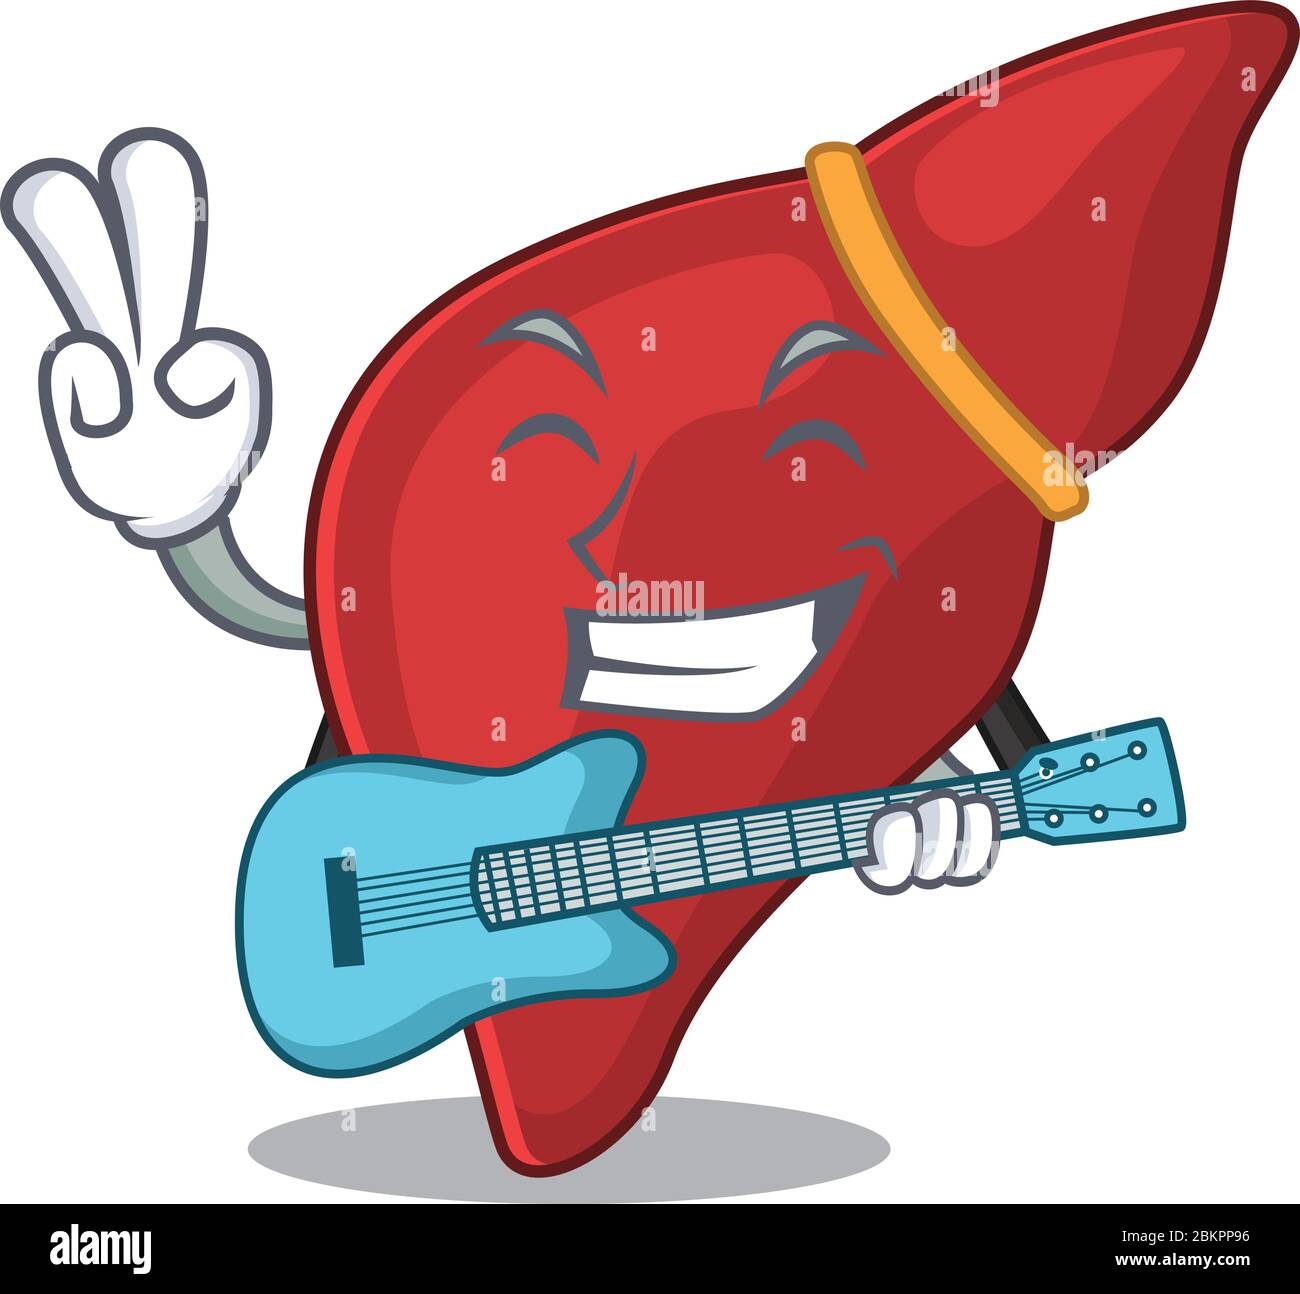 Talented musician of healthy human liver cartoon design playing a guitar Stock Vector